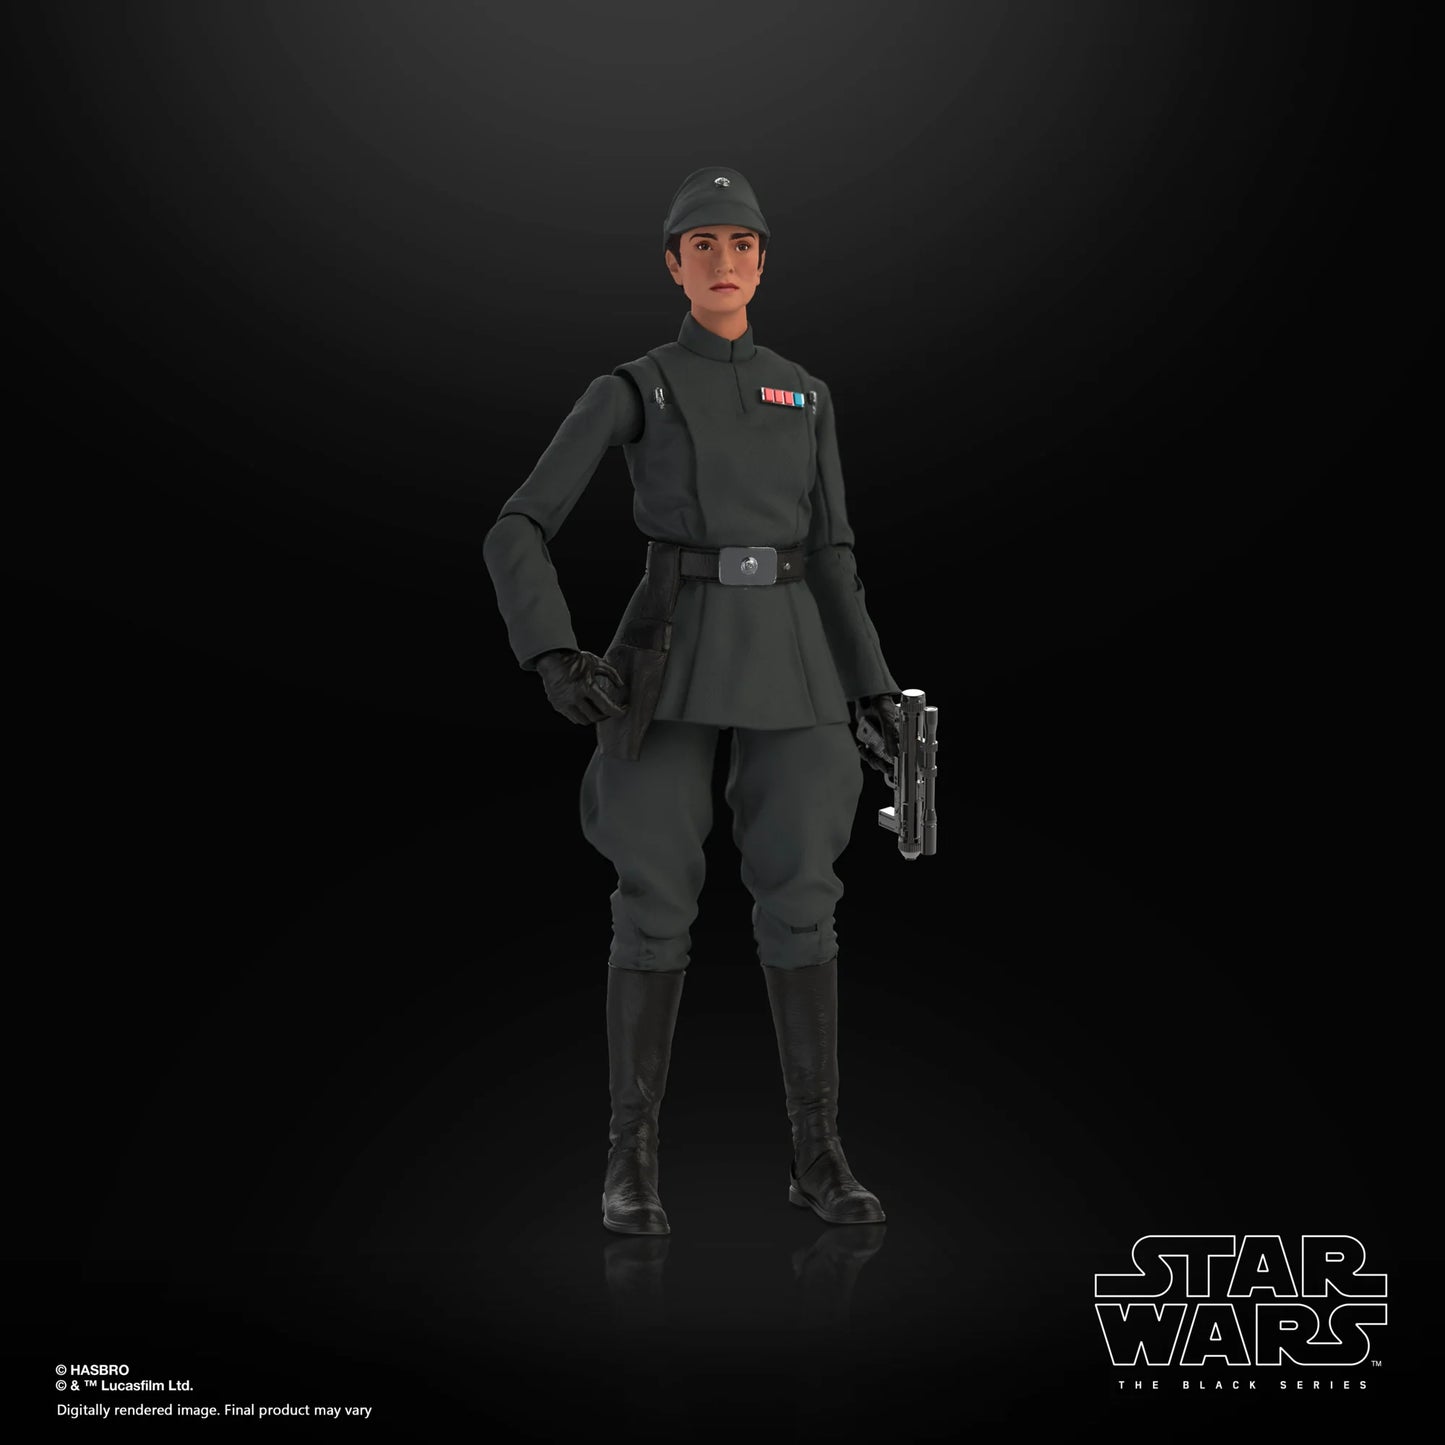 Star Wars The Black Series Tala (Imperial Officer)